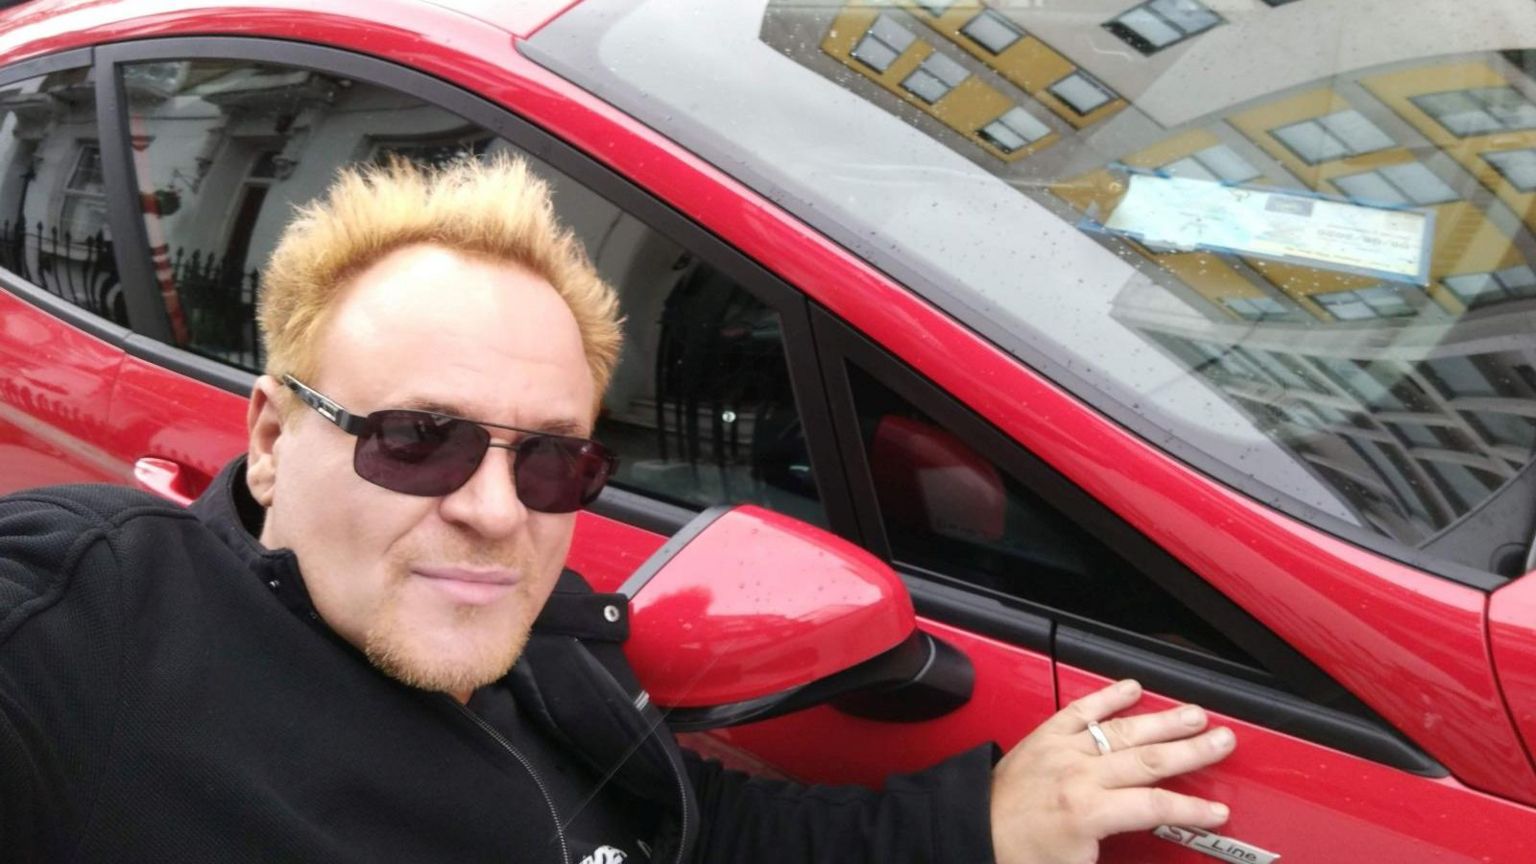 Mik Scarlet next to his car with blue badge on display